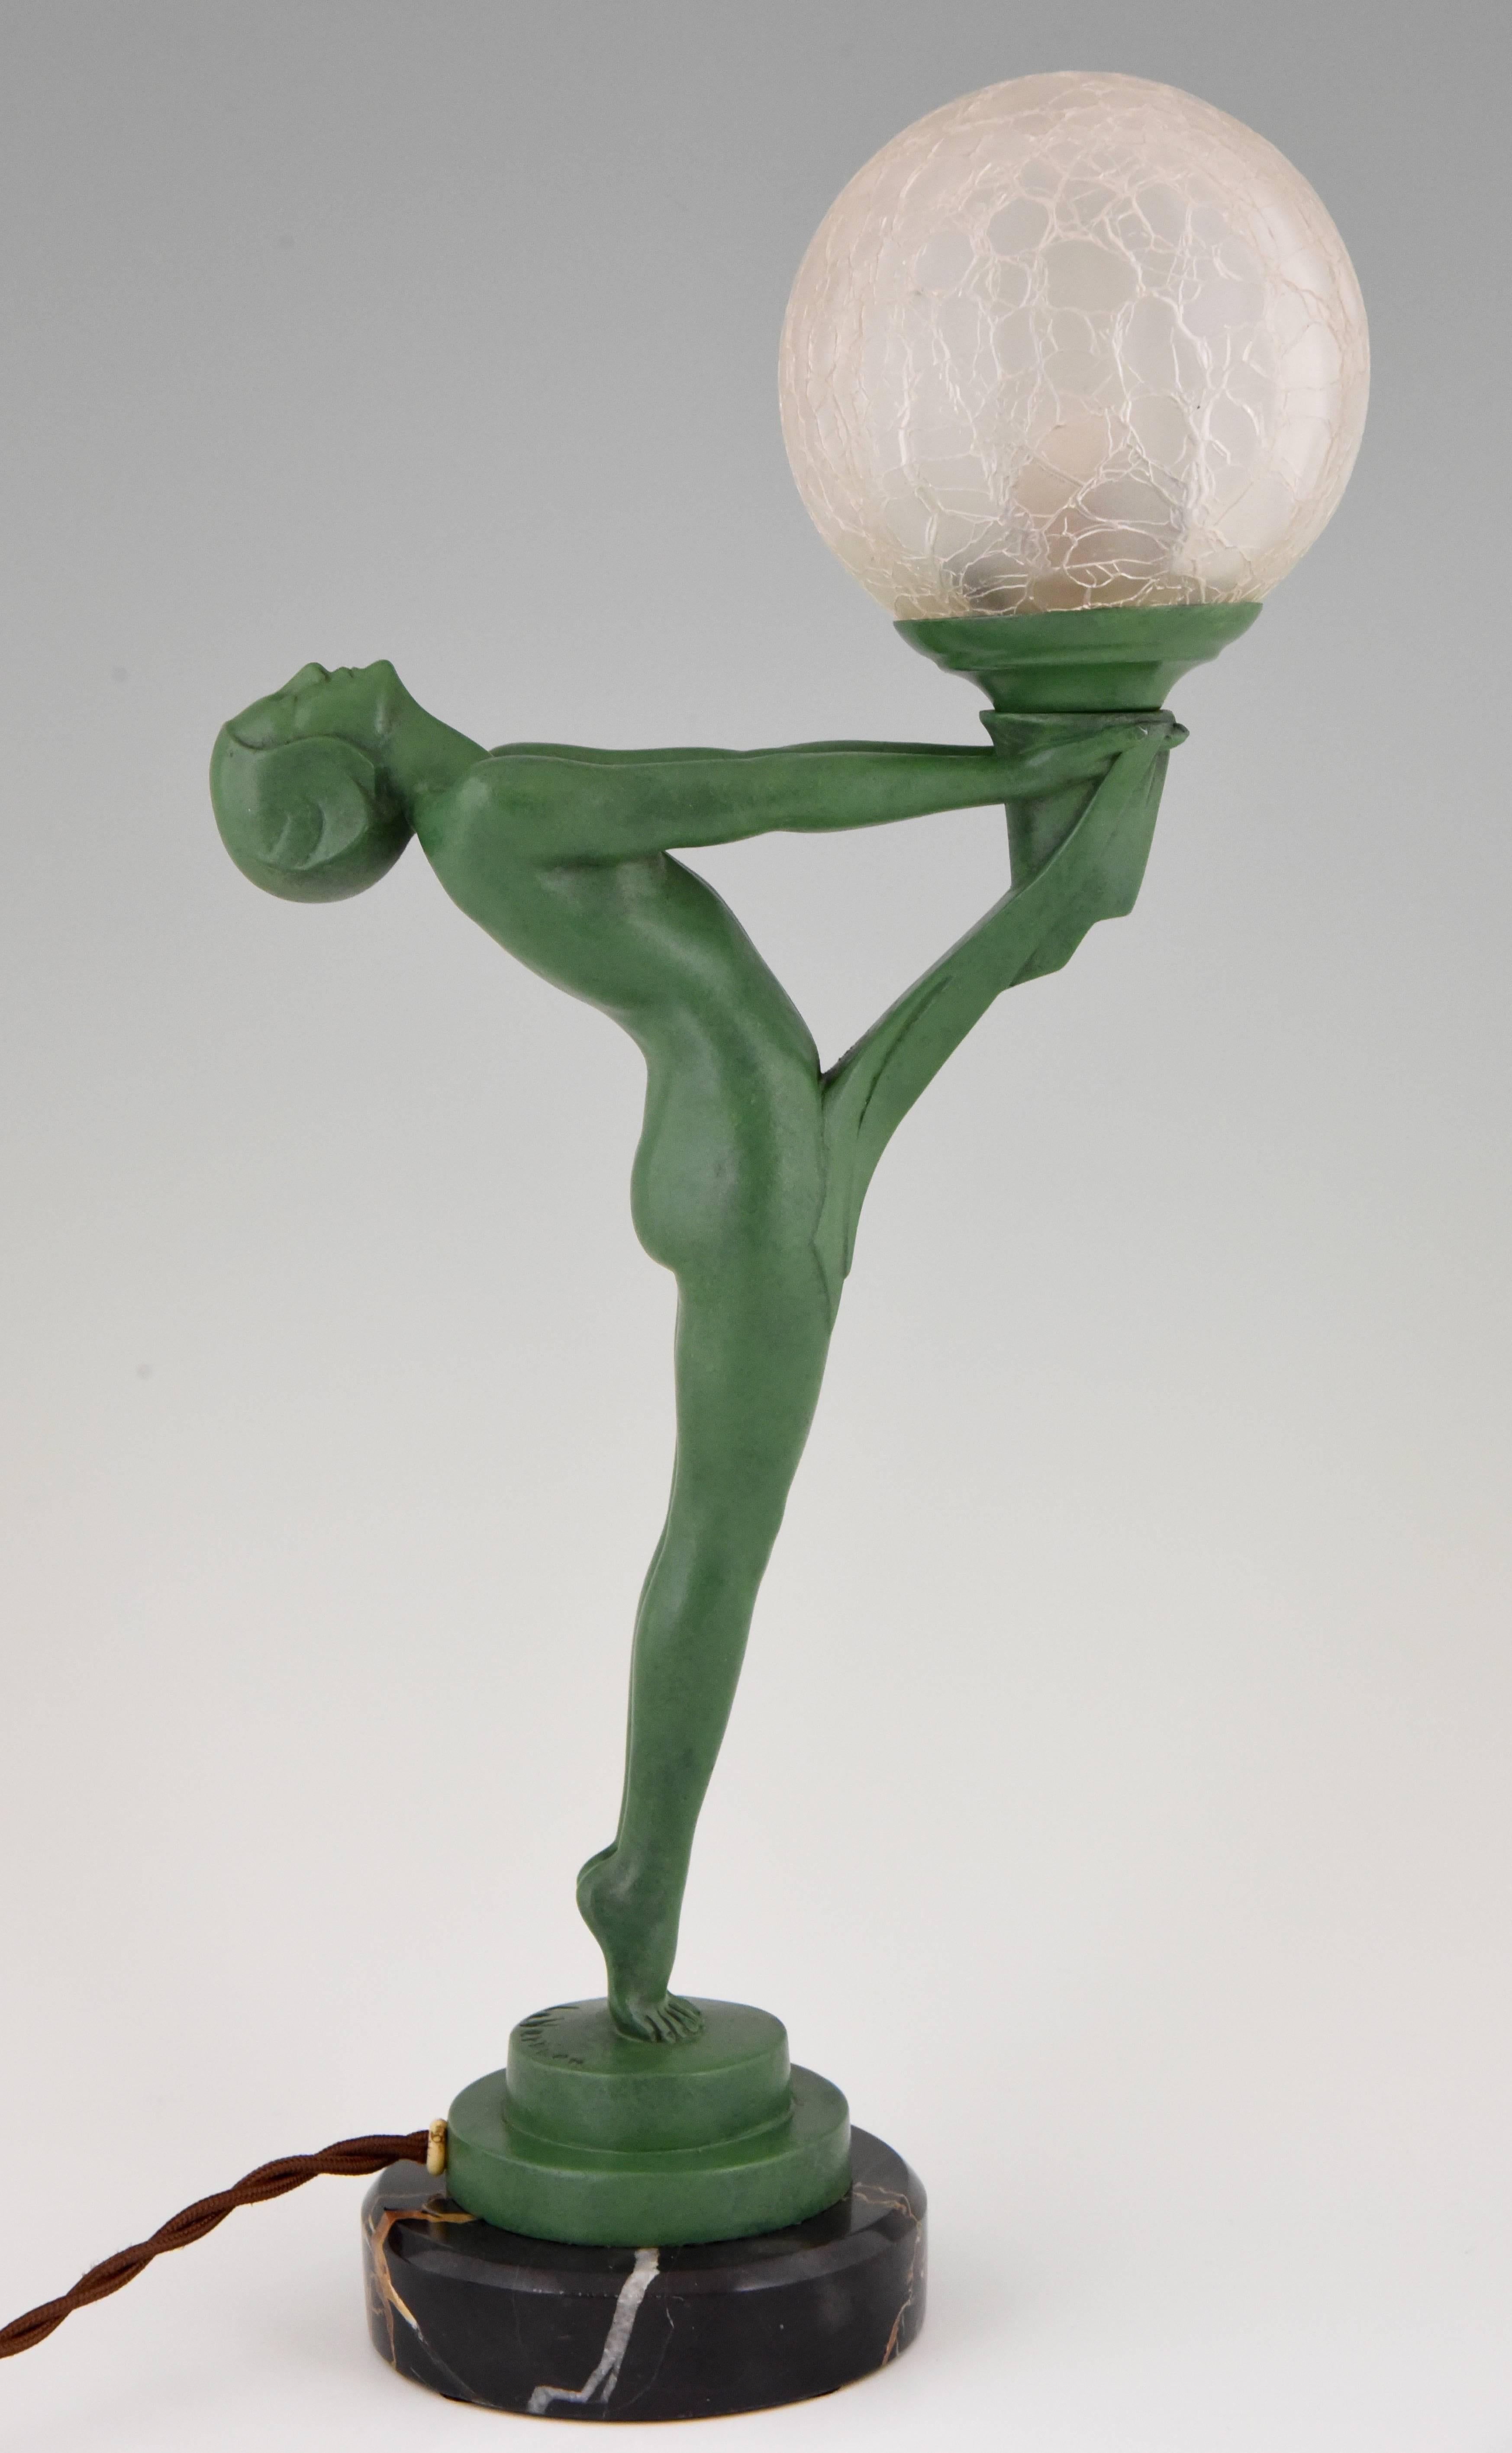 20th Century French Art Deco Figural Table Lamp with Standing Nude by Max Le Verrier, 1930